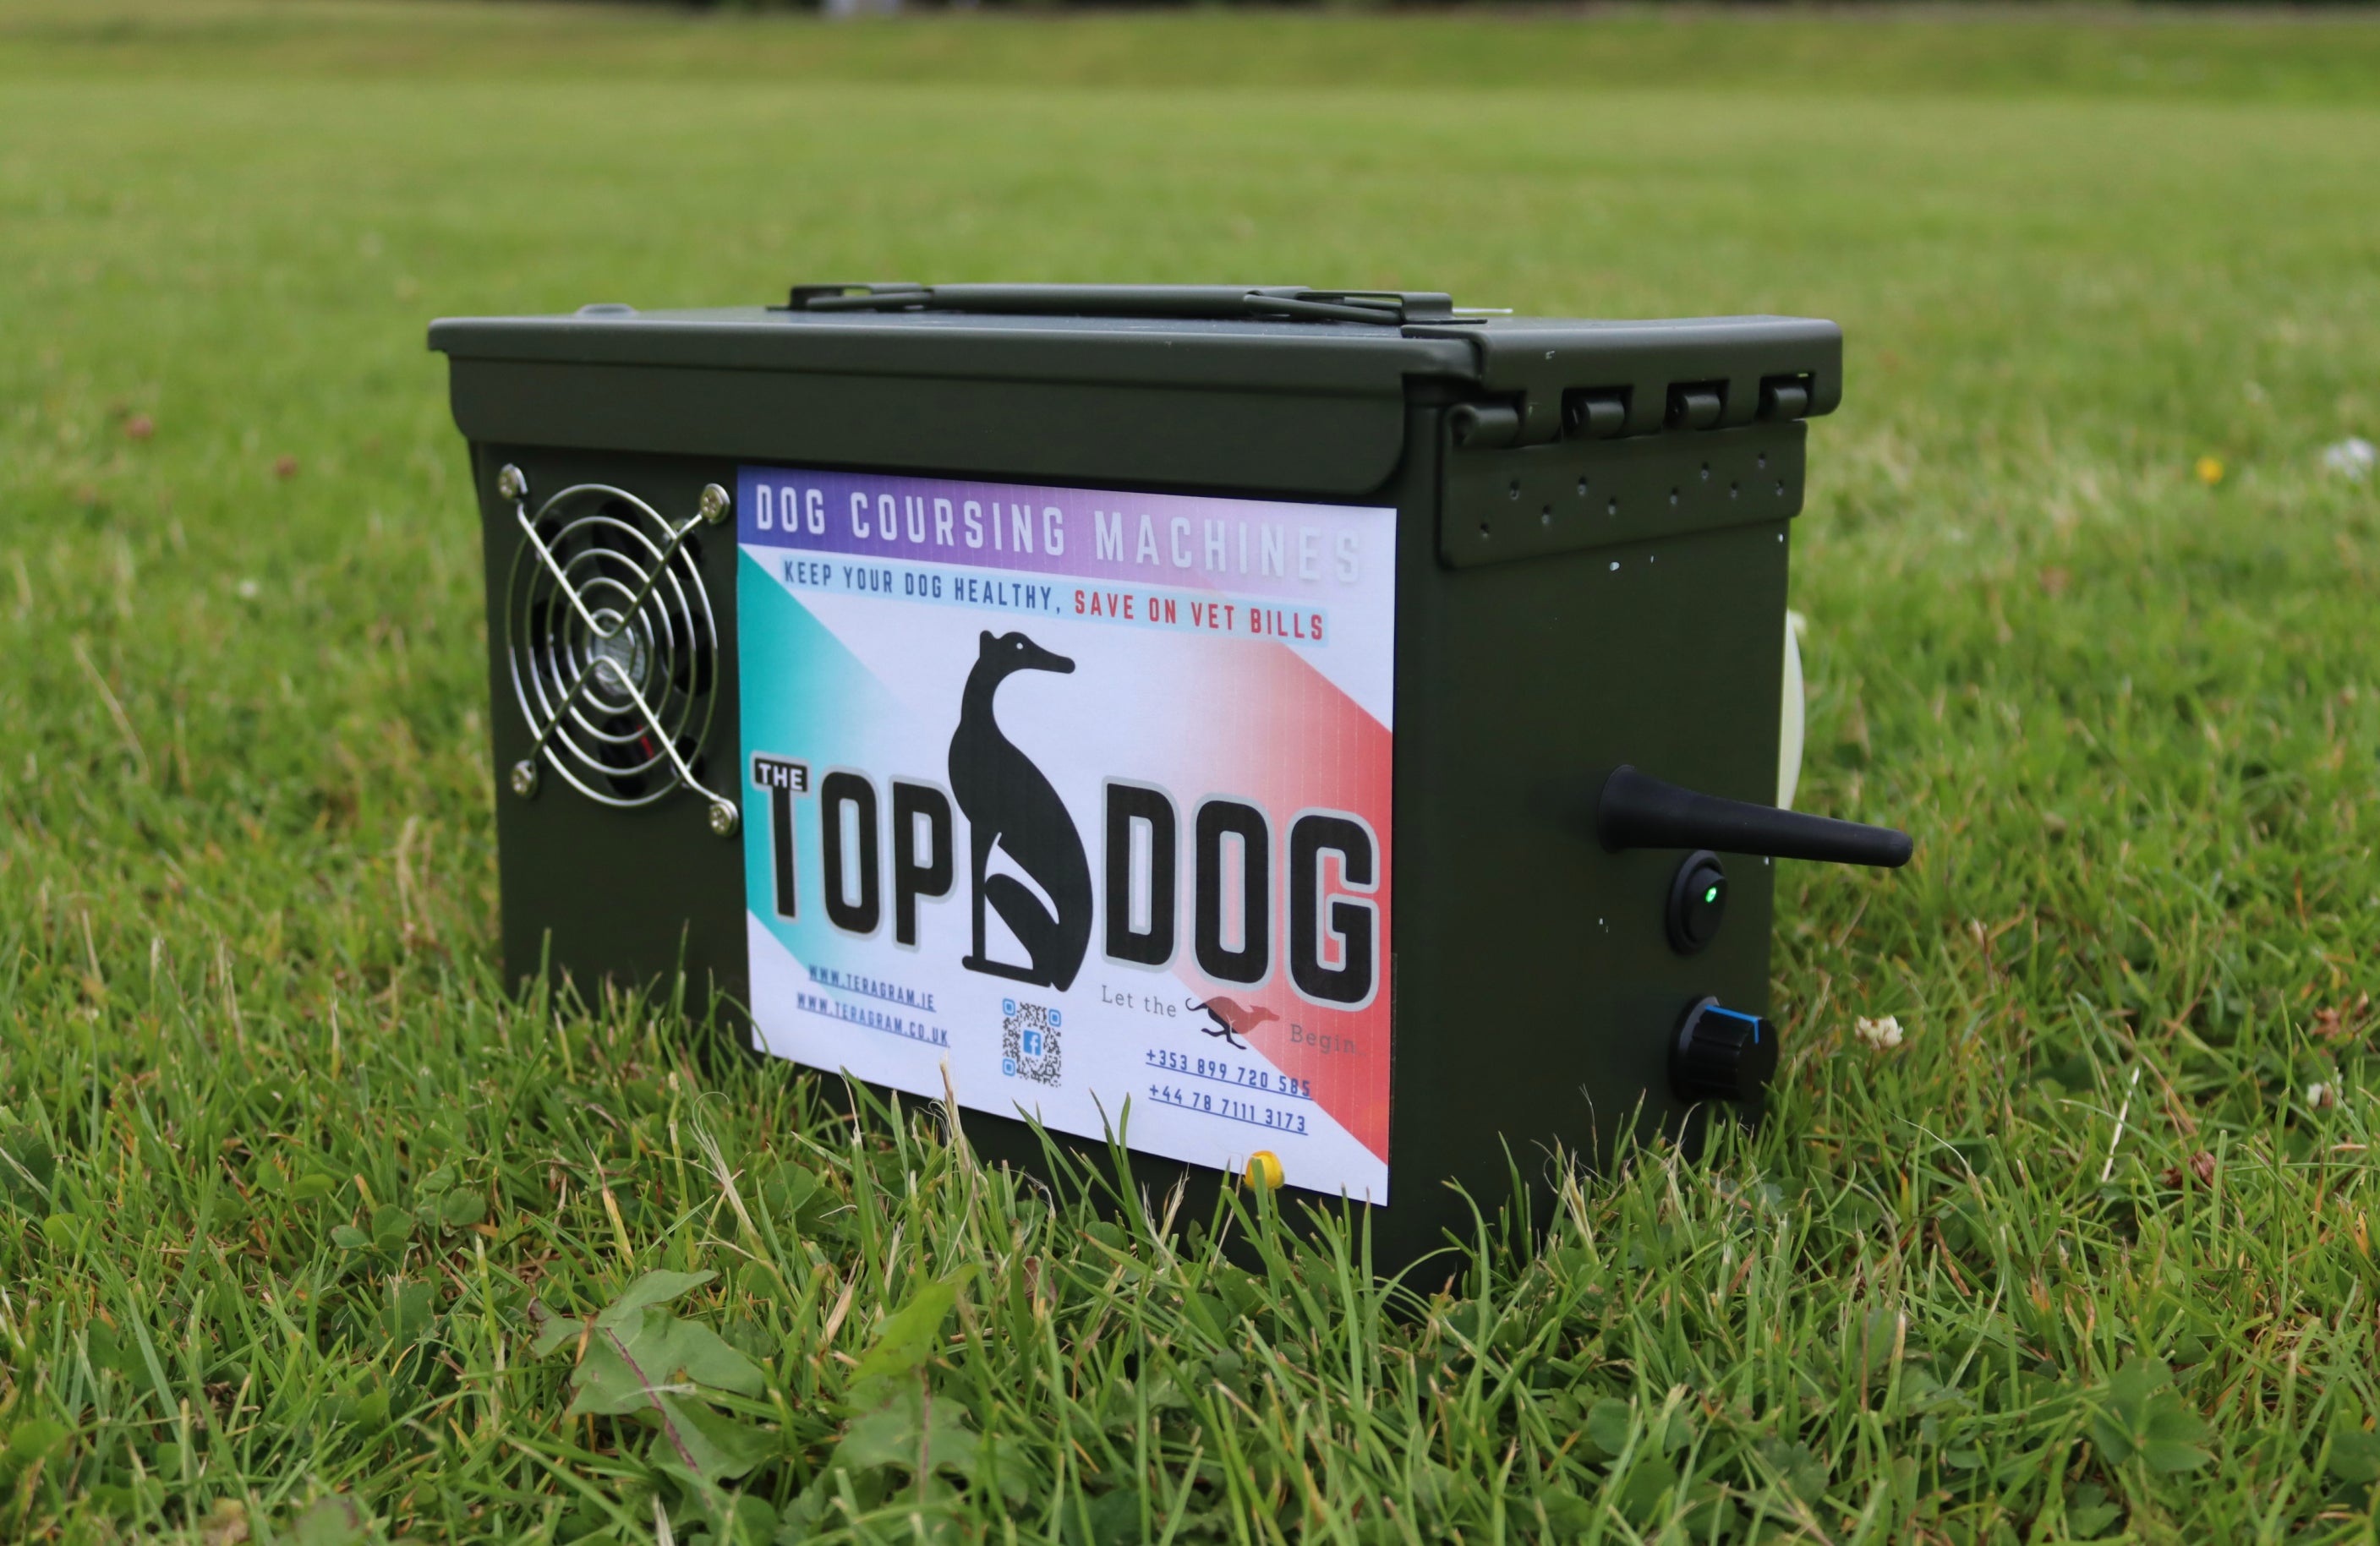 Thetopdogstore-Dog Coursing & exercising Machines-Hand built- Dog Toys- Dog Accessories- Pet Store- Dog Trainer- Greyhound Racing & training- Ireland & UK- Free Delivery